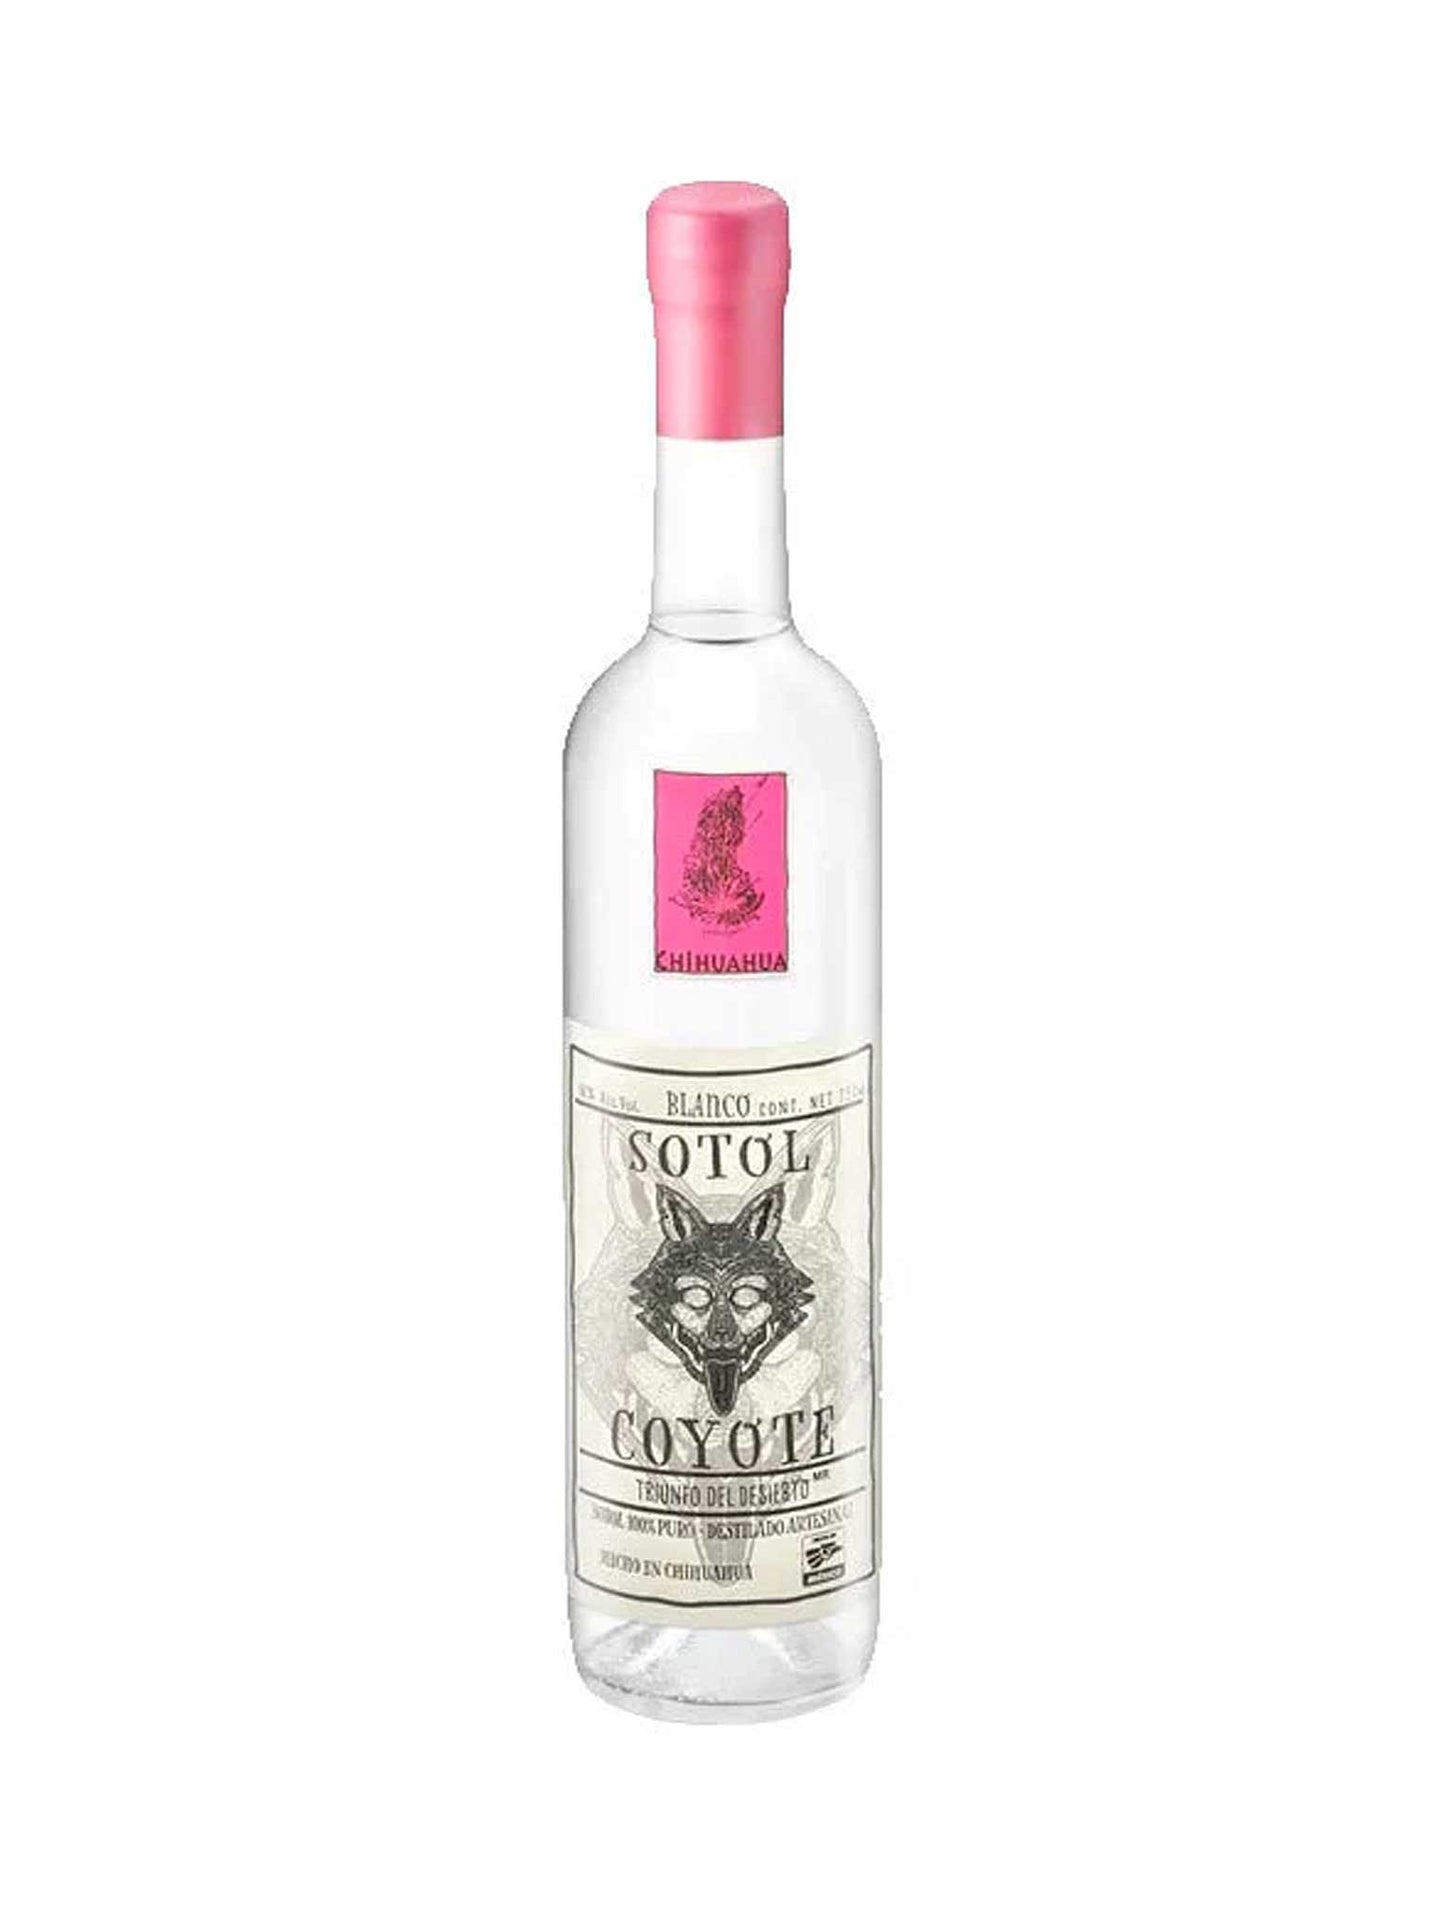 Sotol Coyote Chihuahua Blanco (Pink Label) Dasylirion Leiophyllum 750mL